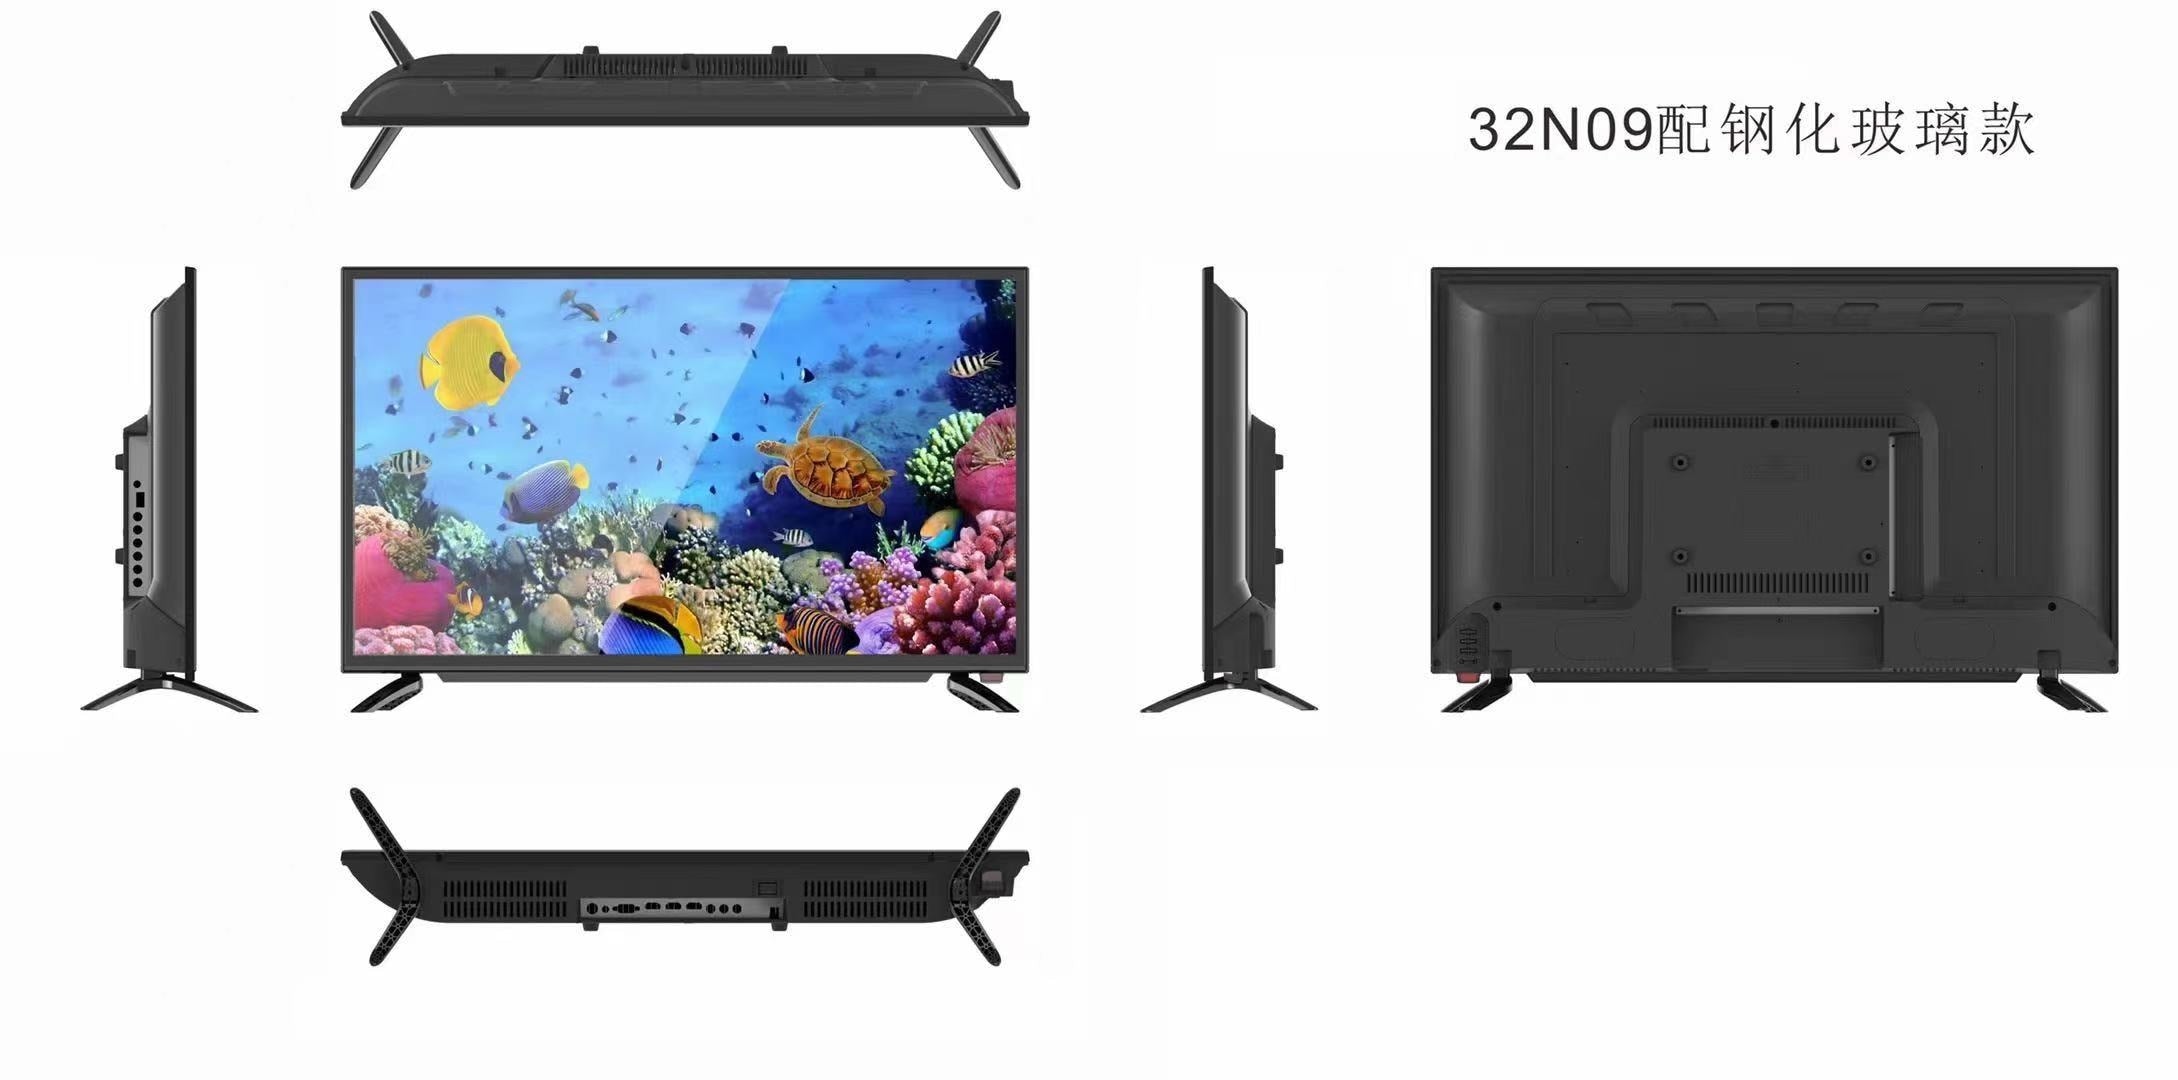 Factory New Model Cheap Price 32inch 3D LED Smart TV Television Wholesale